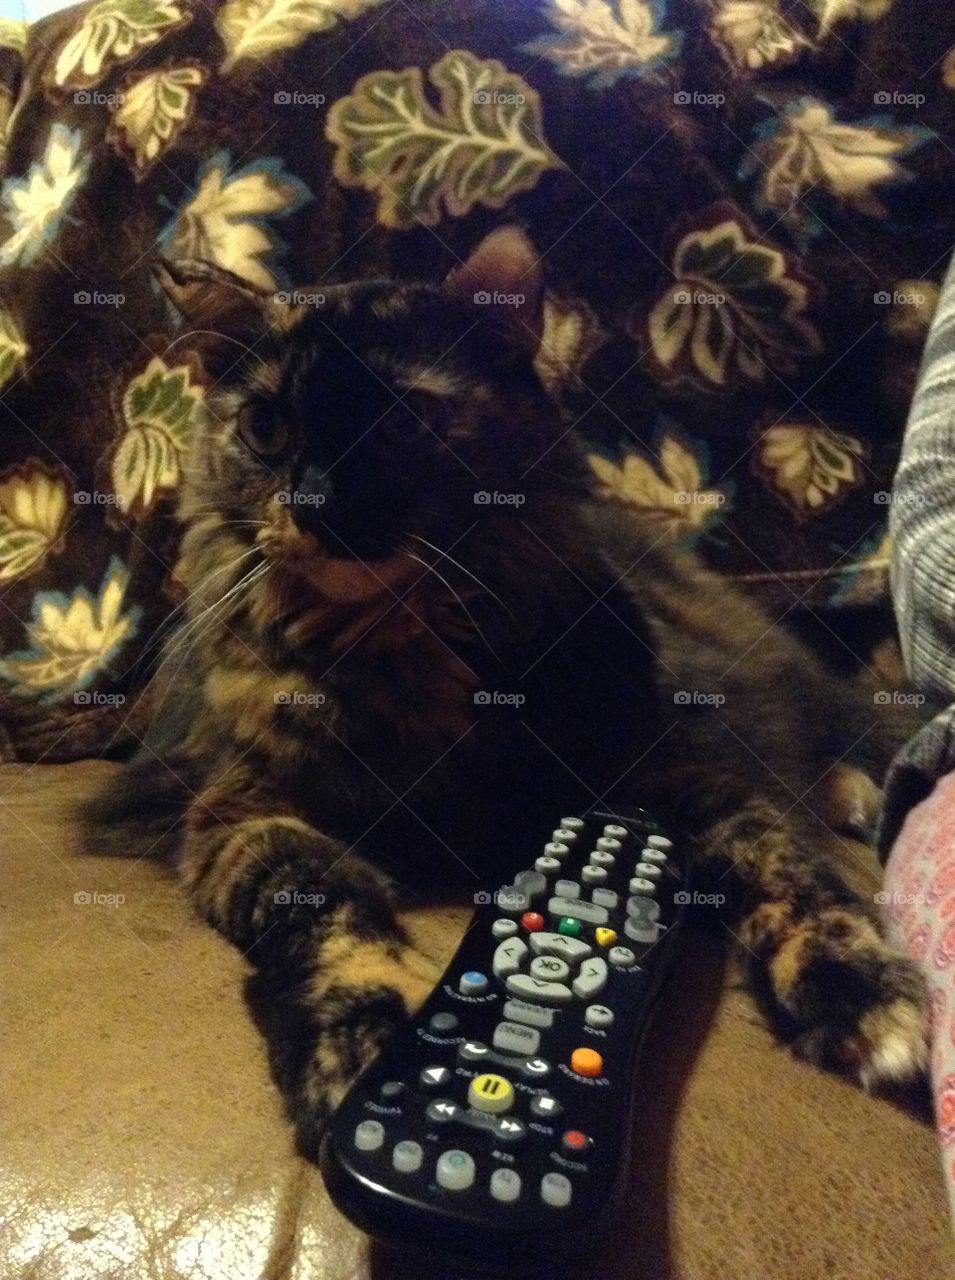 Cat with remote control